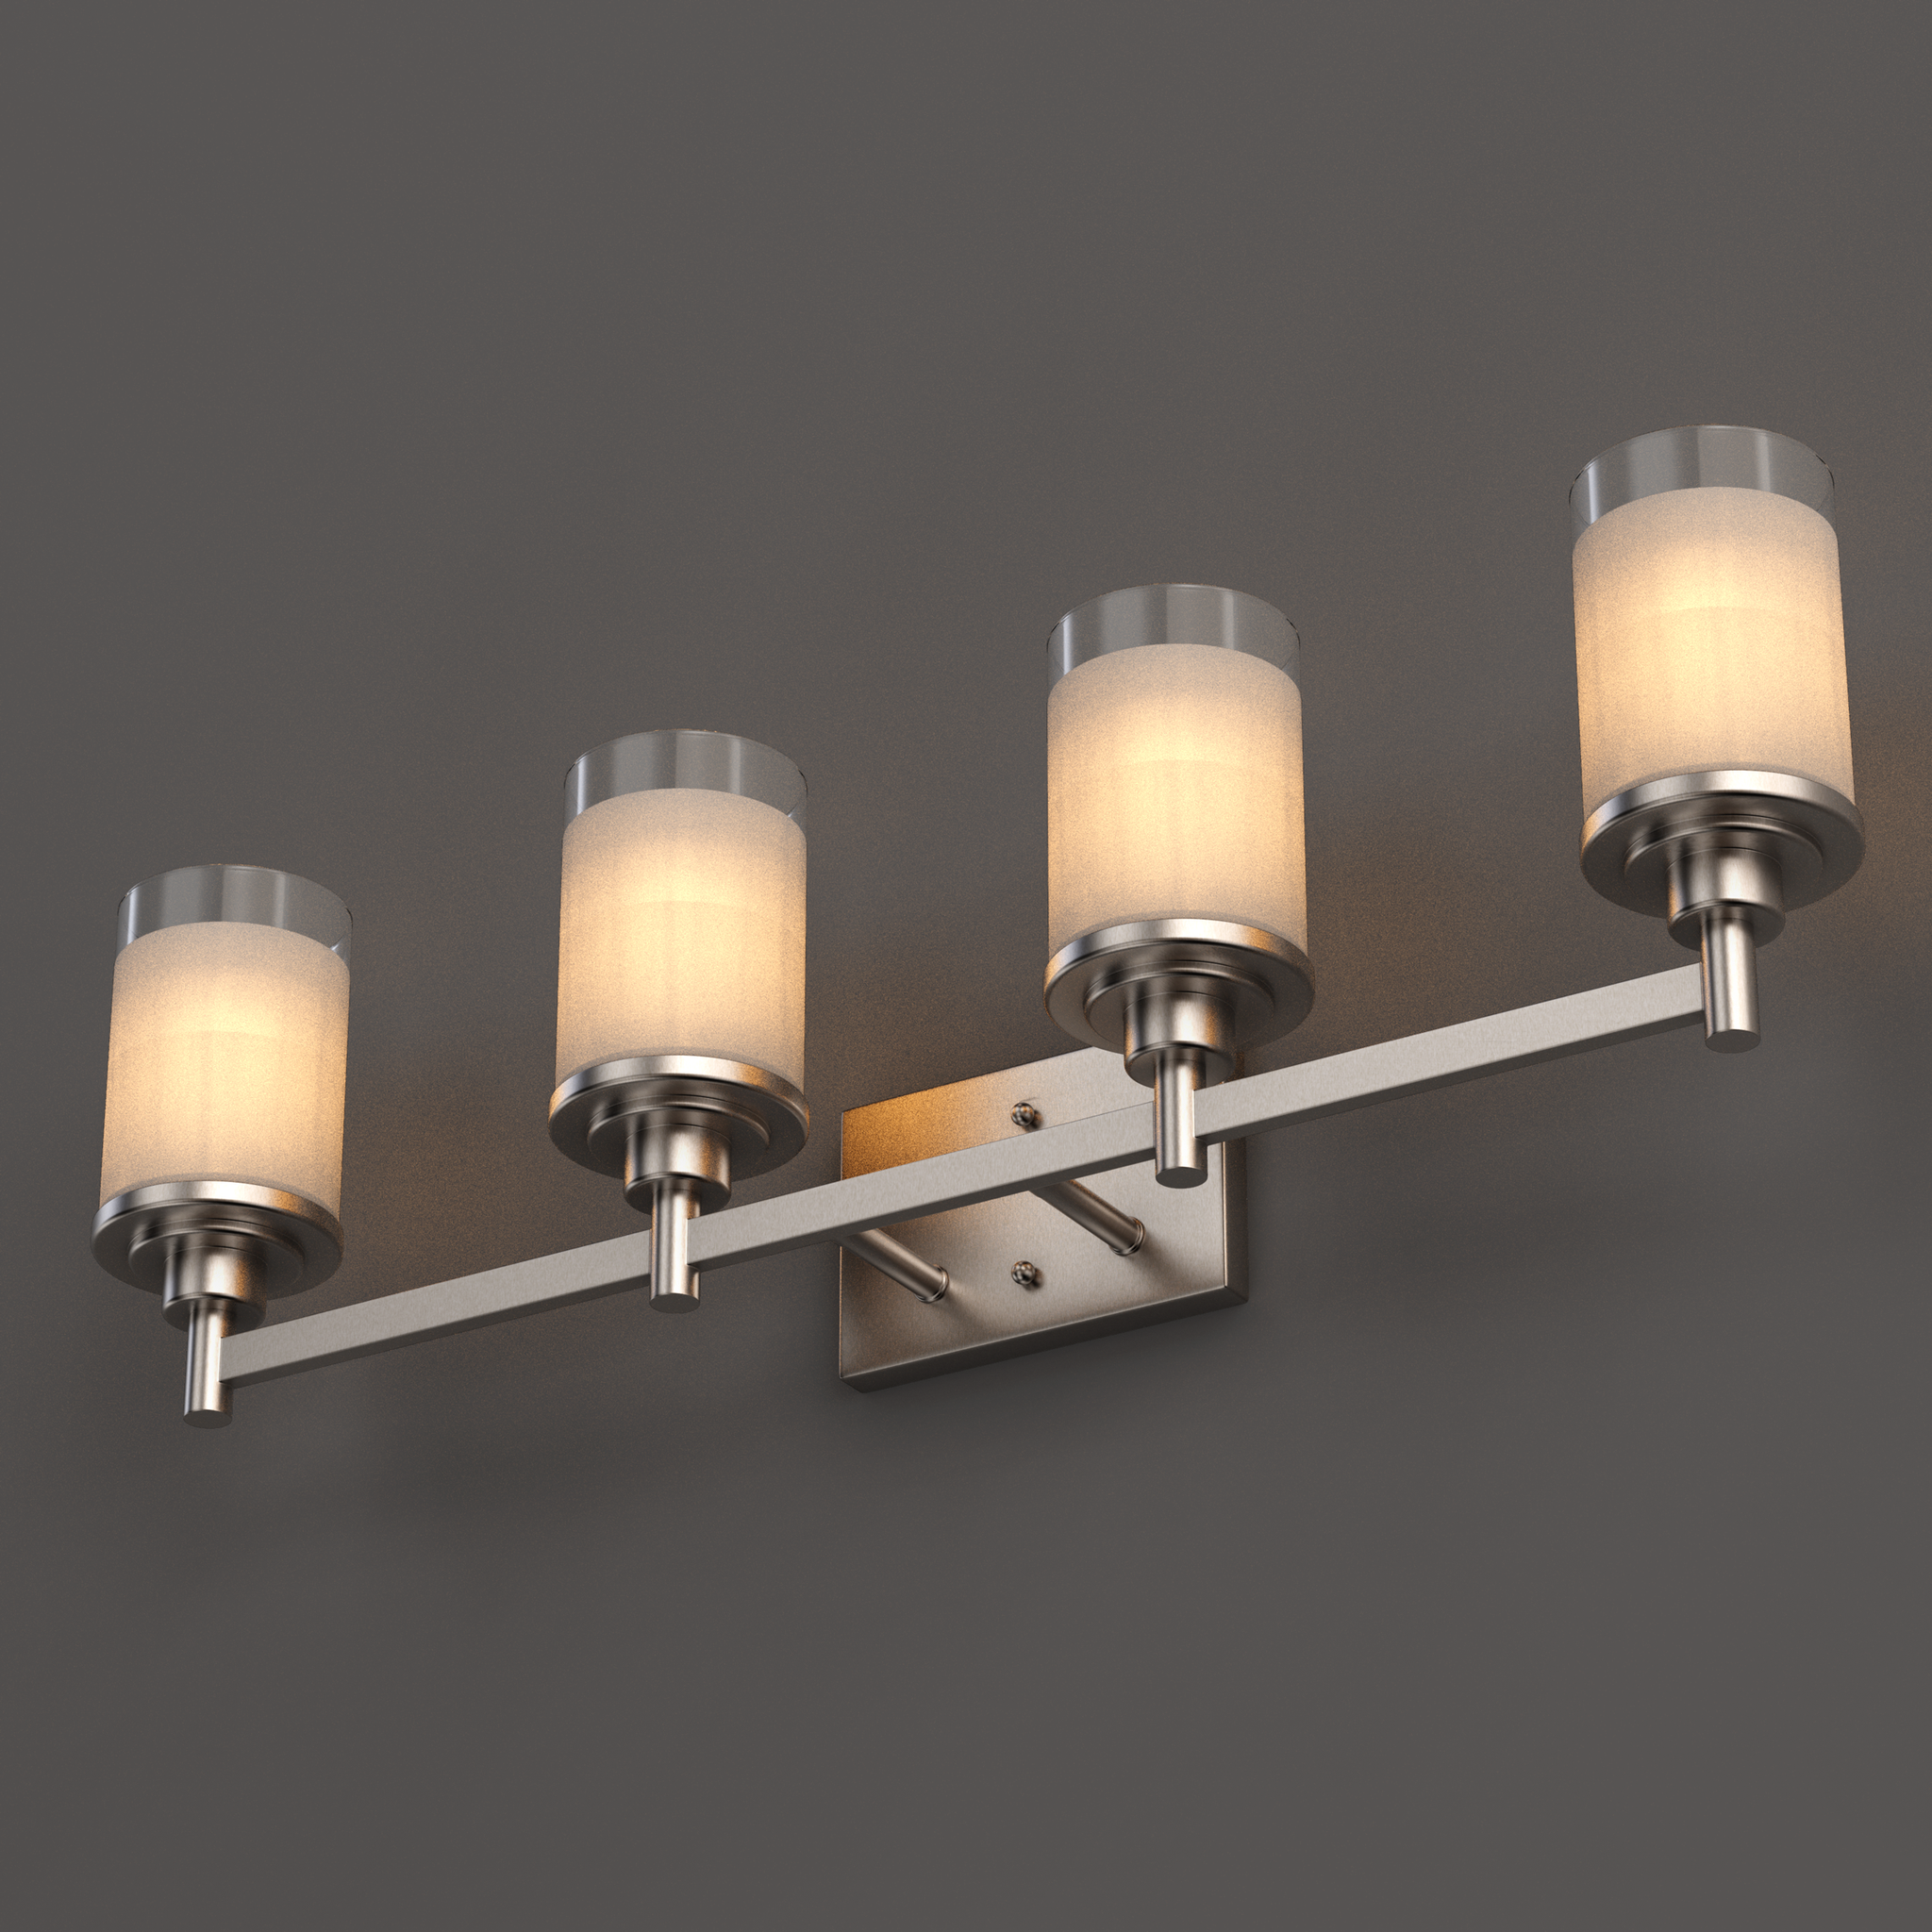 Cylinder Shape Bathroom Light Fixtures with Frosted Glass Shades, 2-Light/3-Light/4-Light, Wall Mount, Vanity Lighting